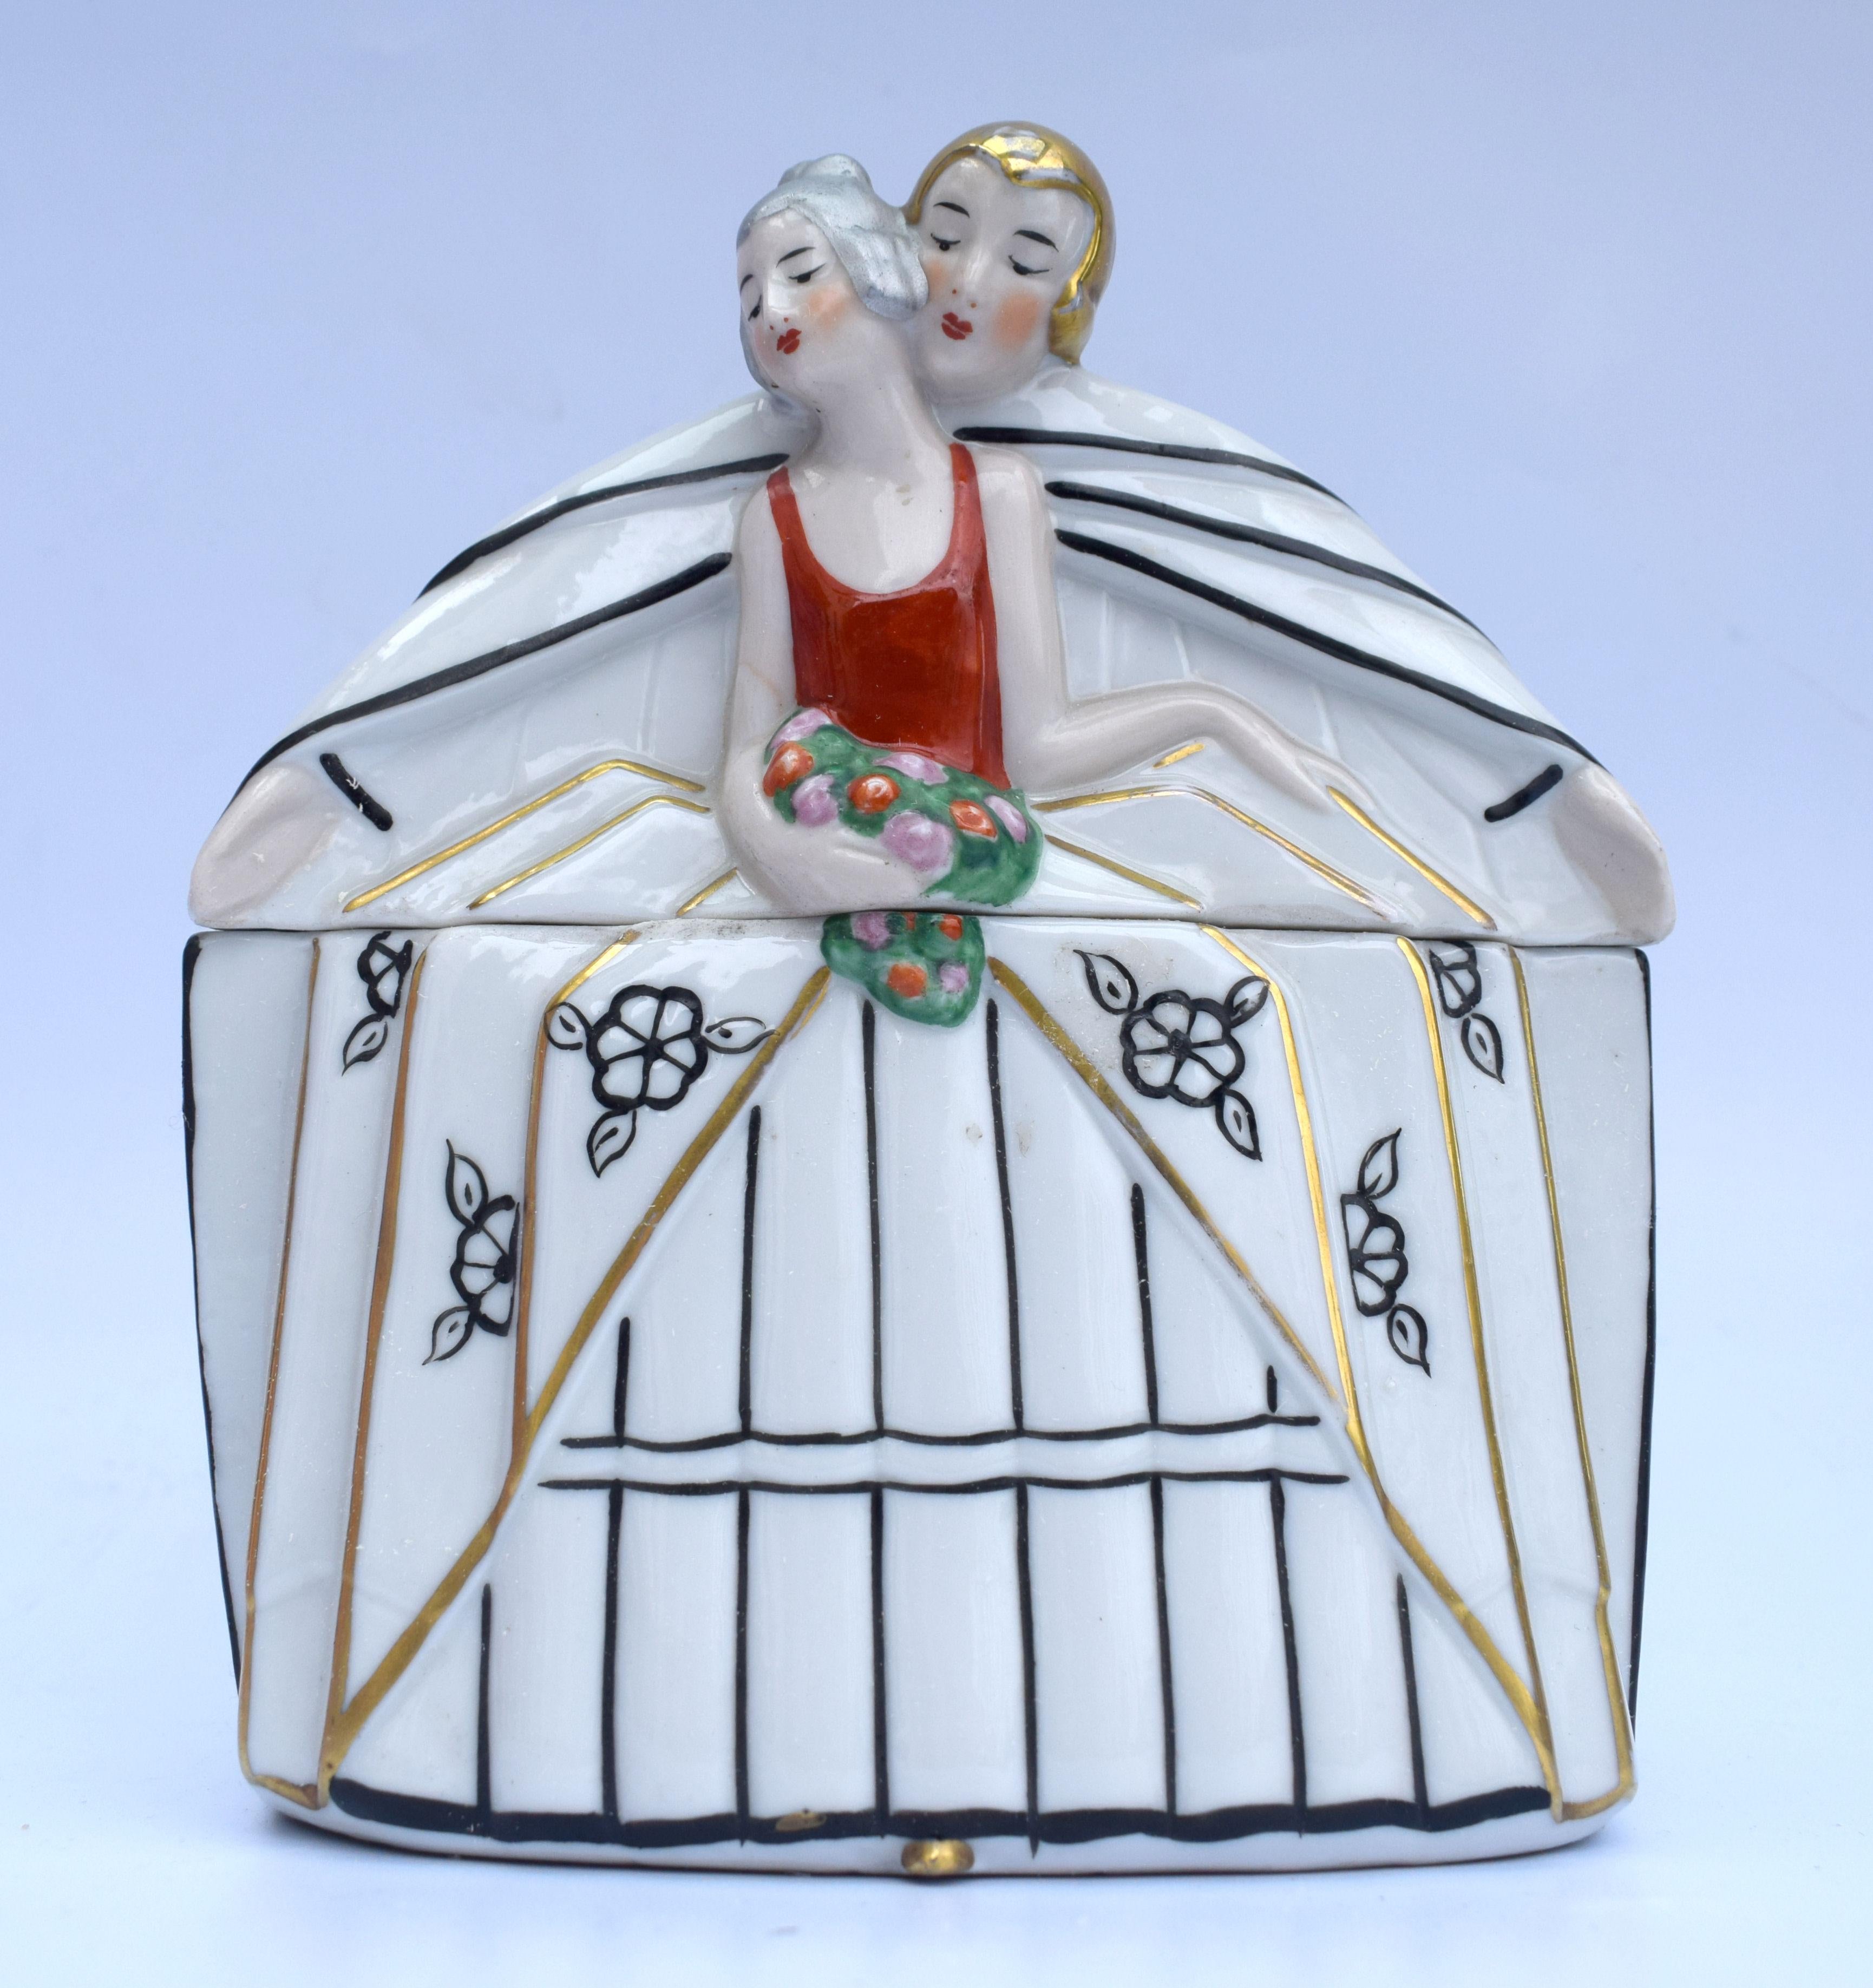 An exceptional Art Deco powder jar very desirable and would enhance any collection. The representation of a couple in love has been expertly hand painted, from the lightly blushed cheeks to the bouquet of flowers, this is a great example of Art